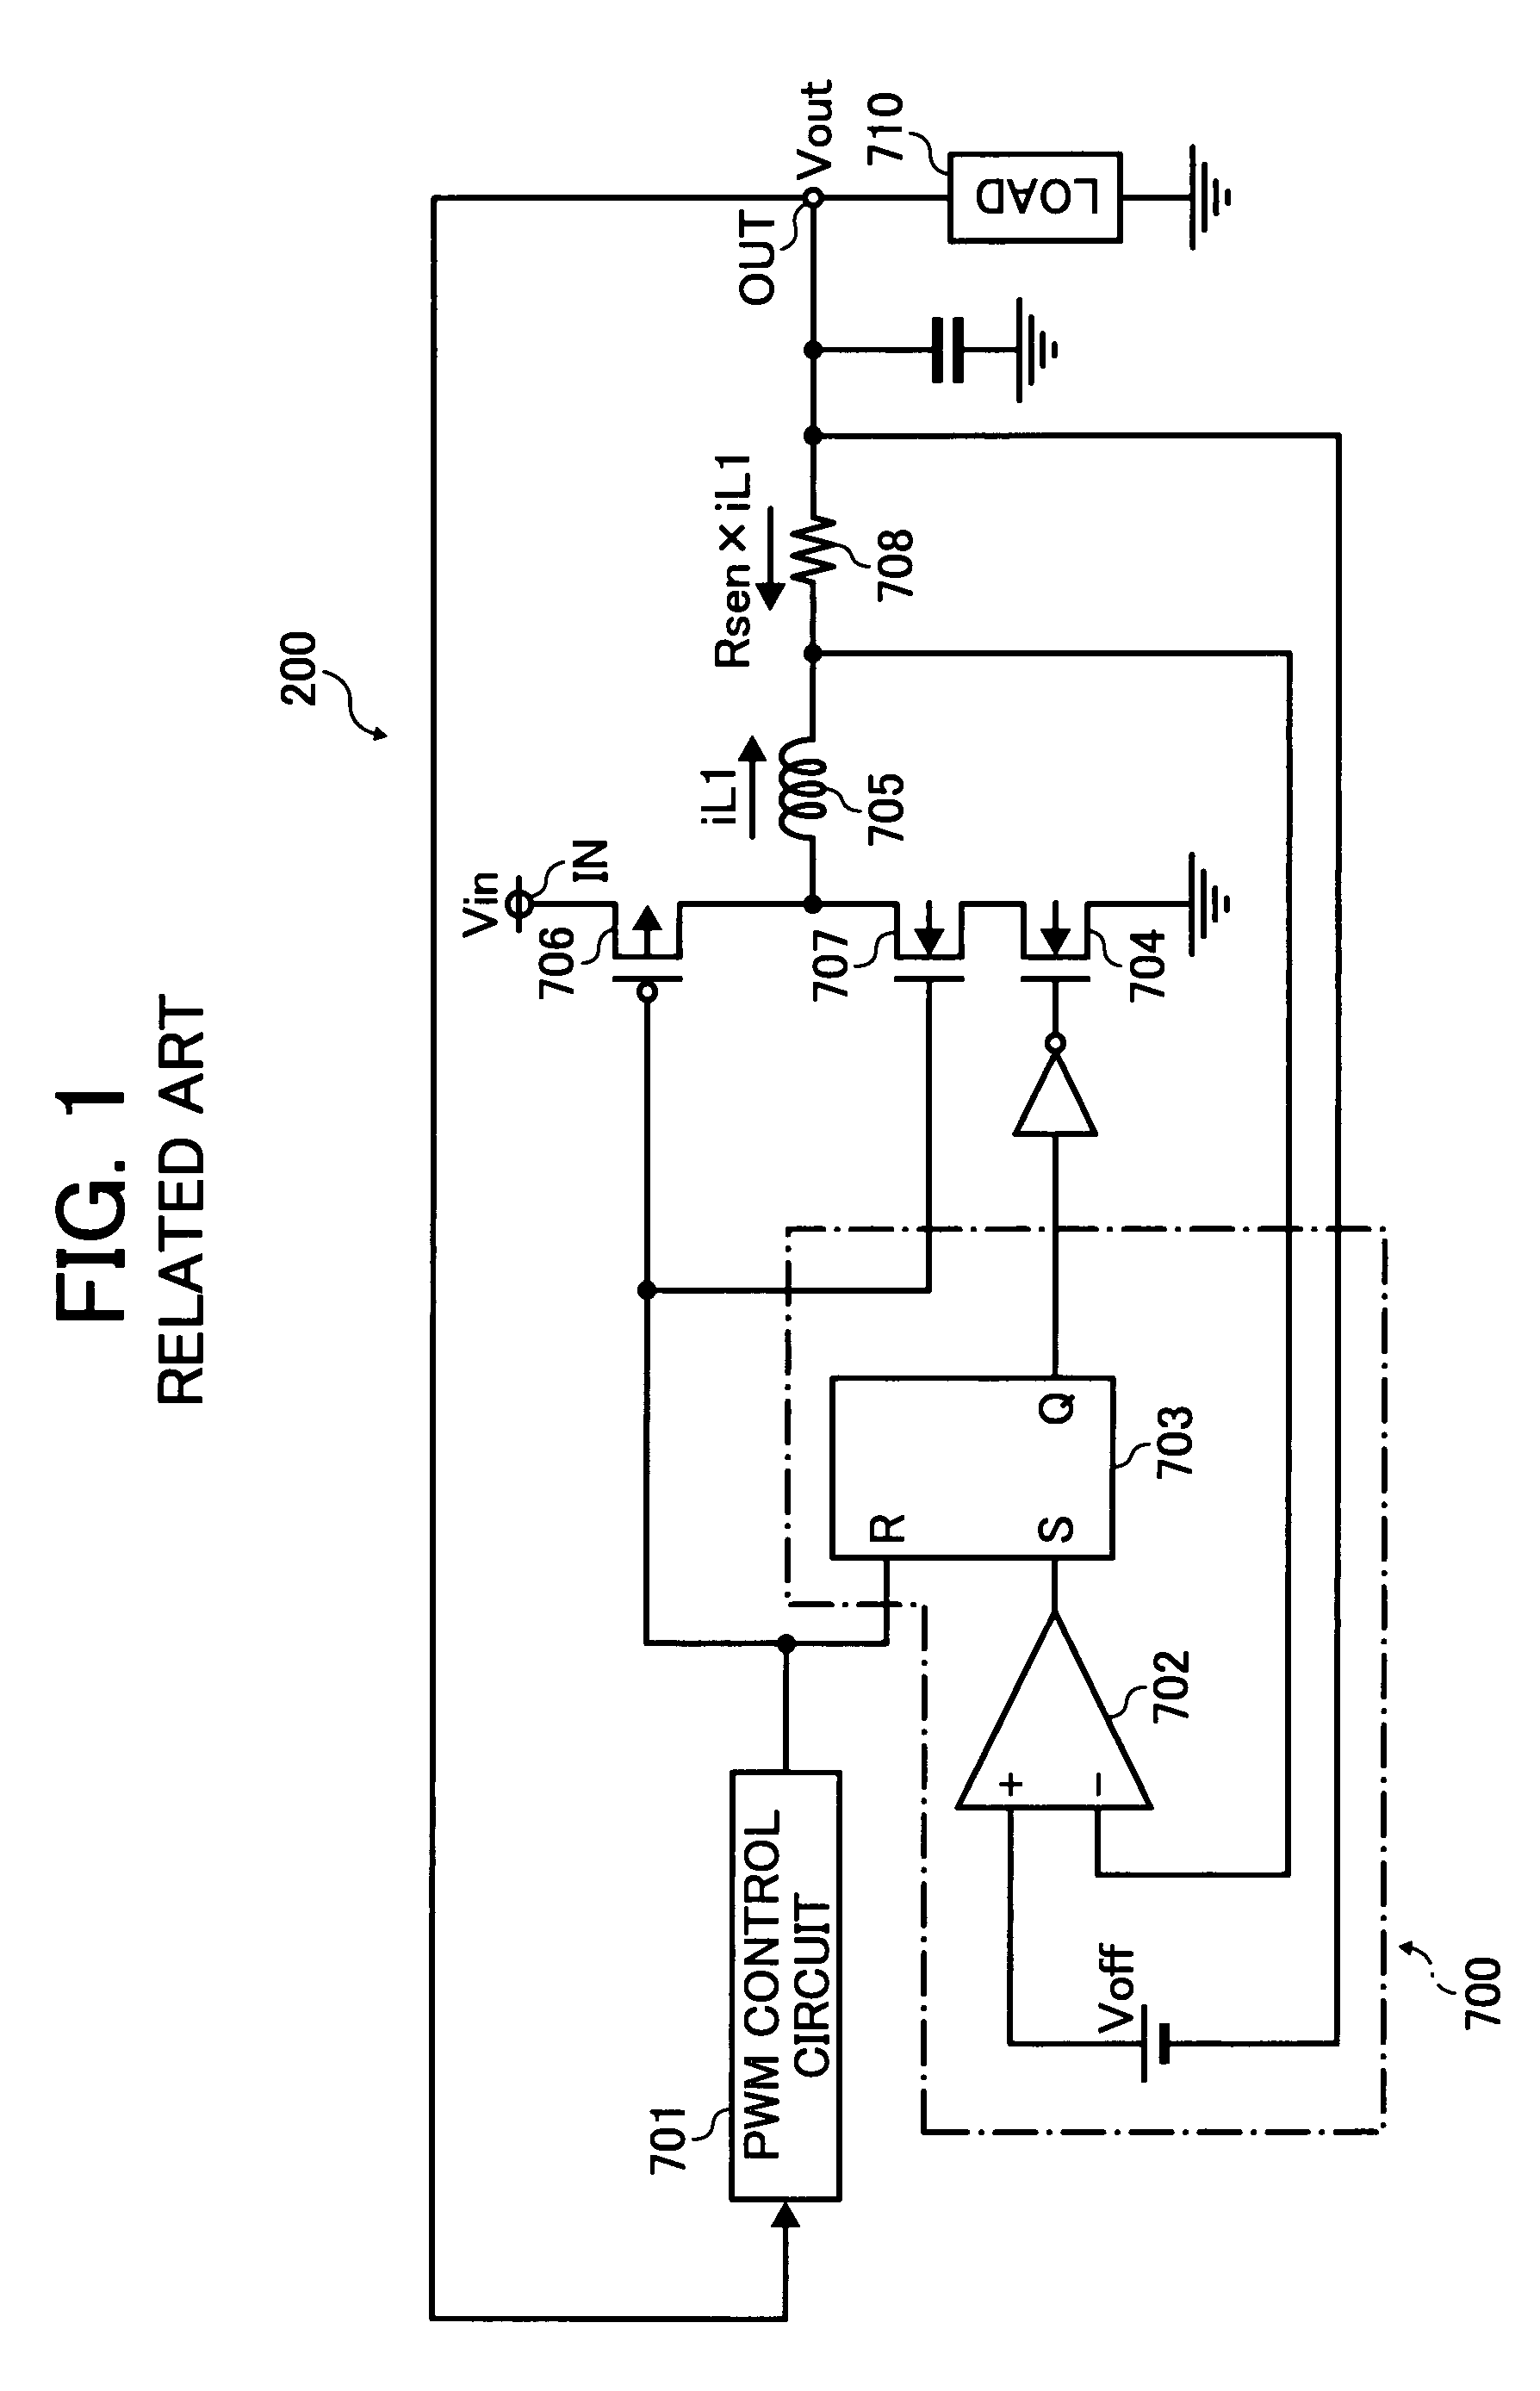 Synchronous rectification switching regulator, control circuit for synchronous rectification switching regulator, and control method for synchronous rectification switching regulator